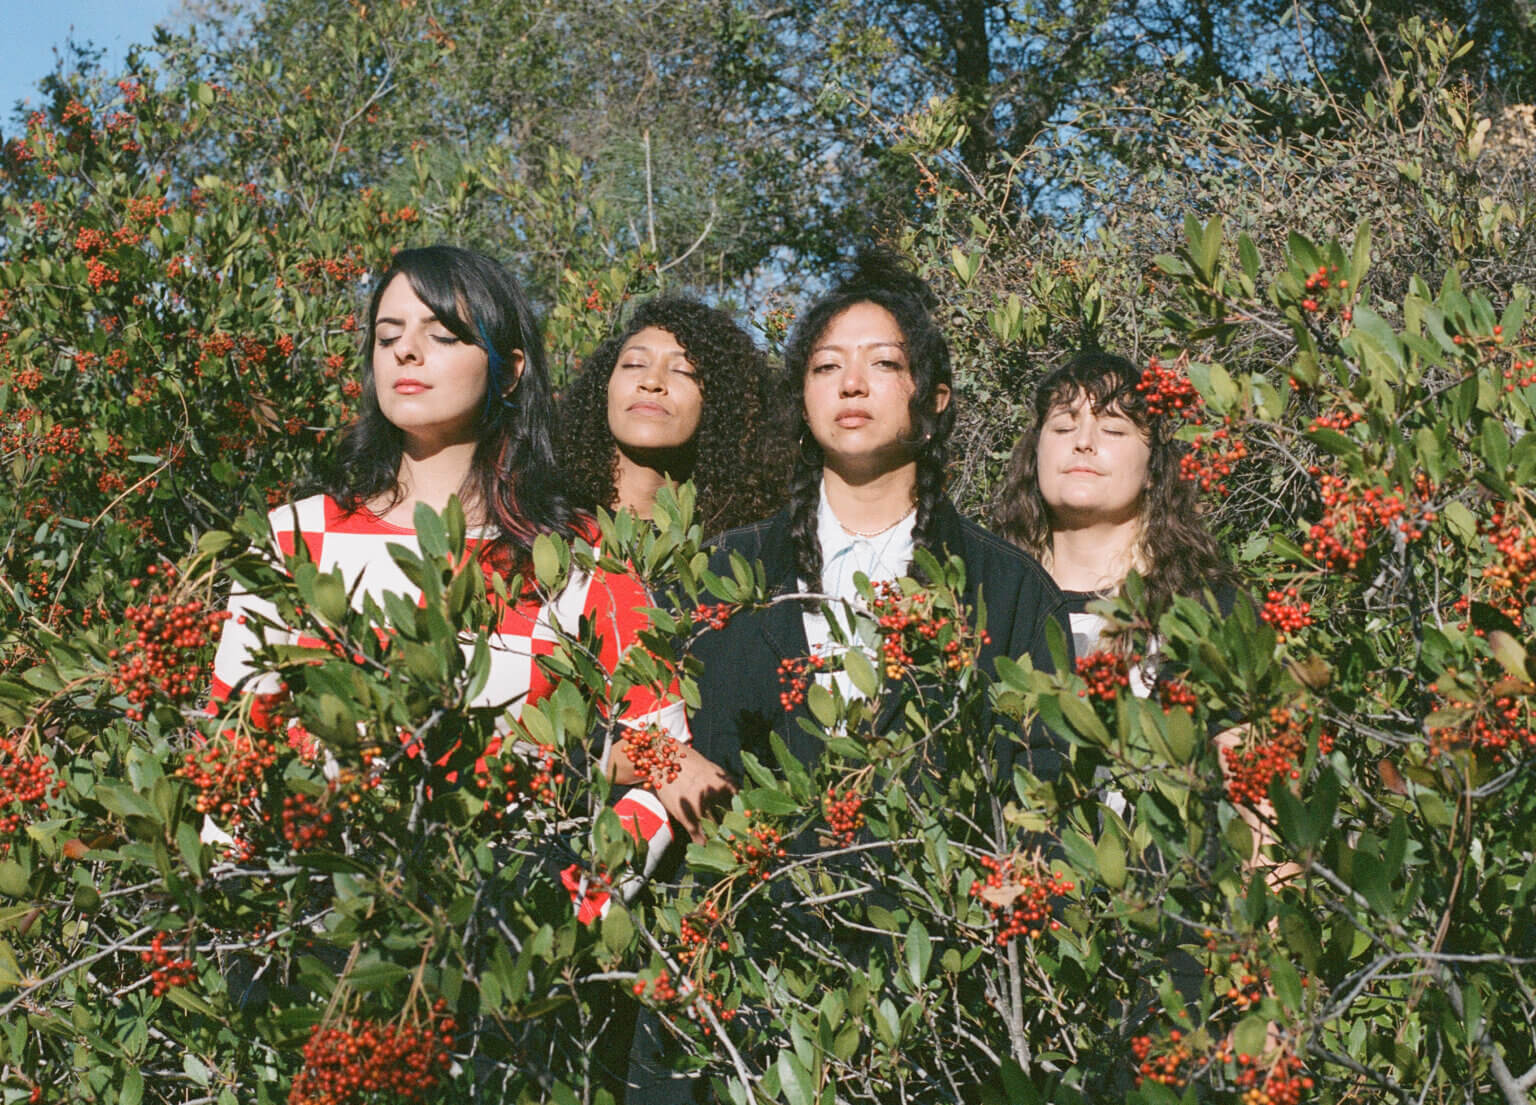 “I’ll Go With You" by La Luz is Northern Transmissions Song of the Day